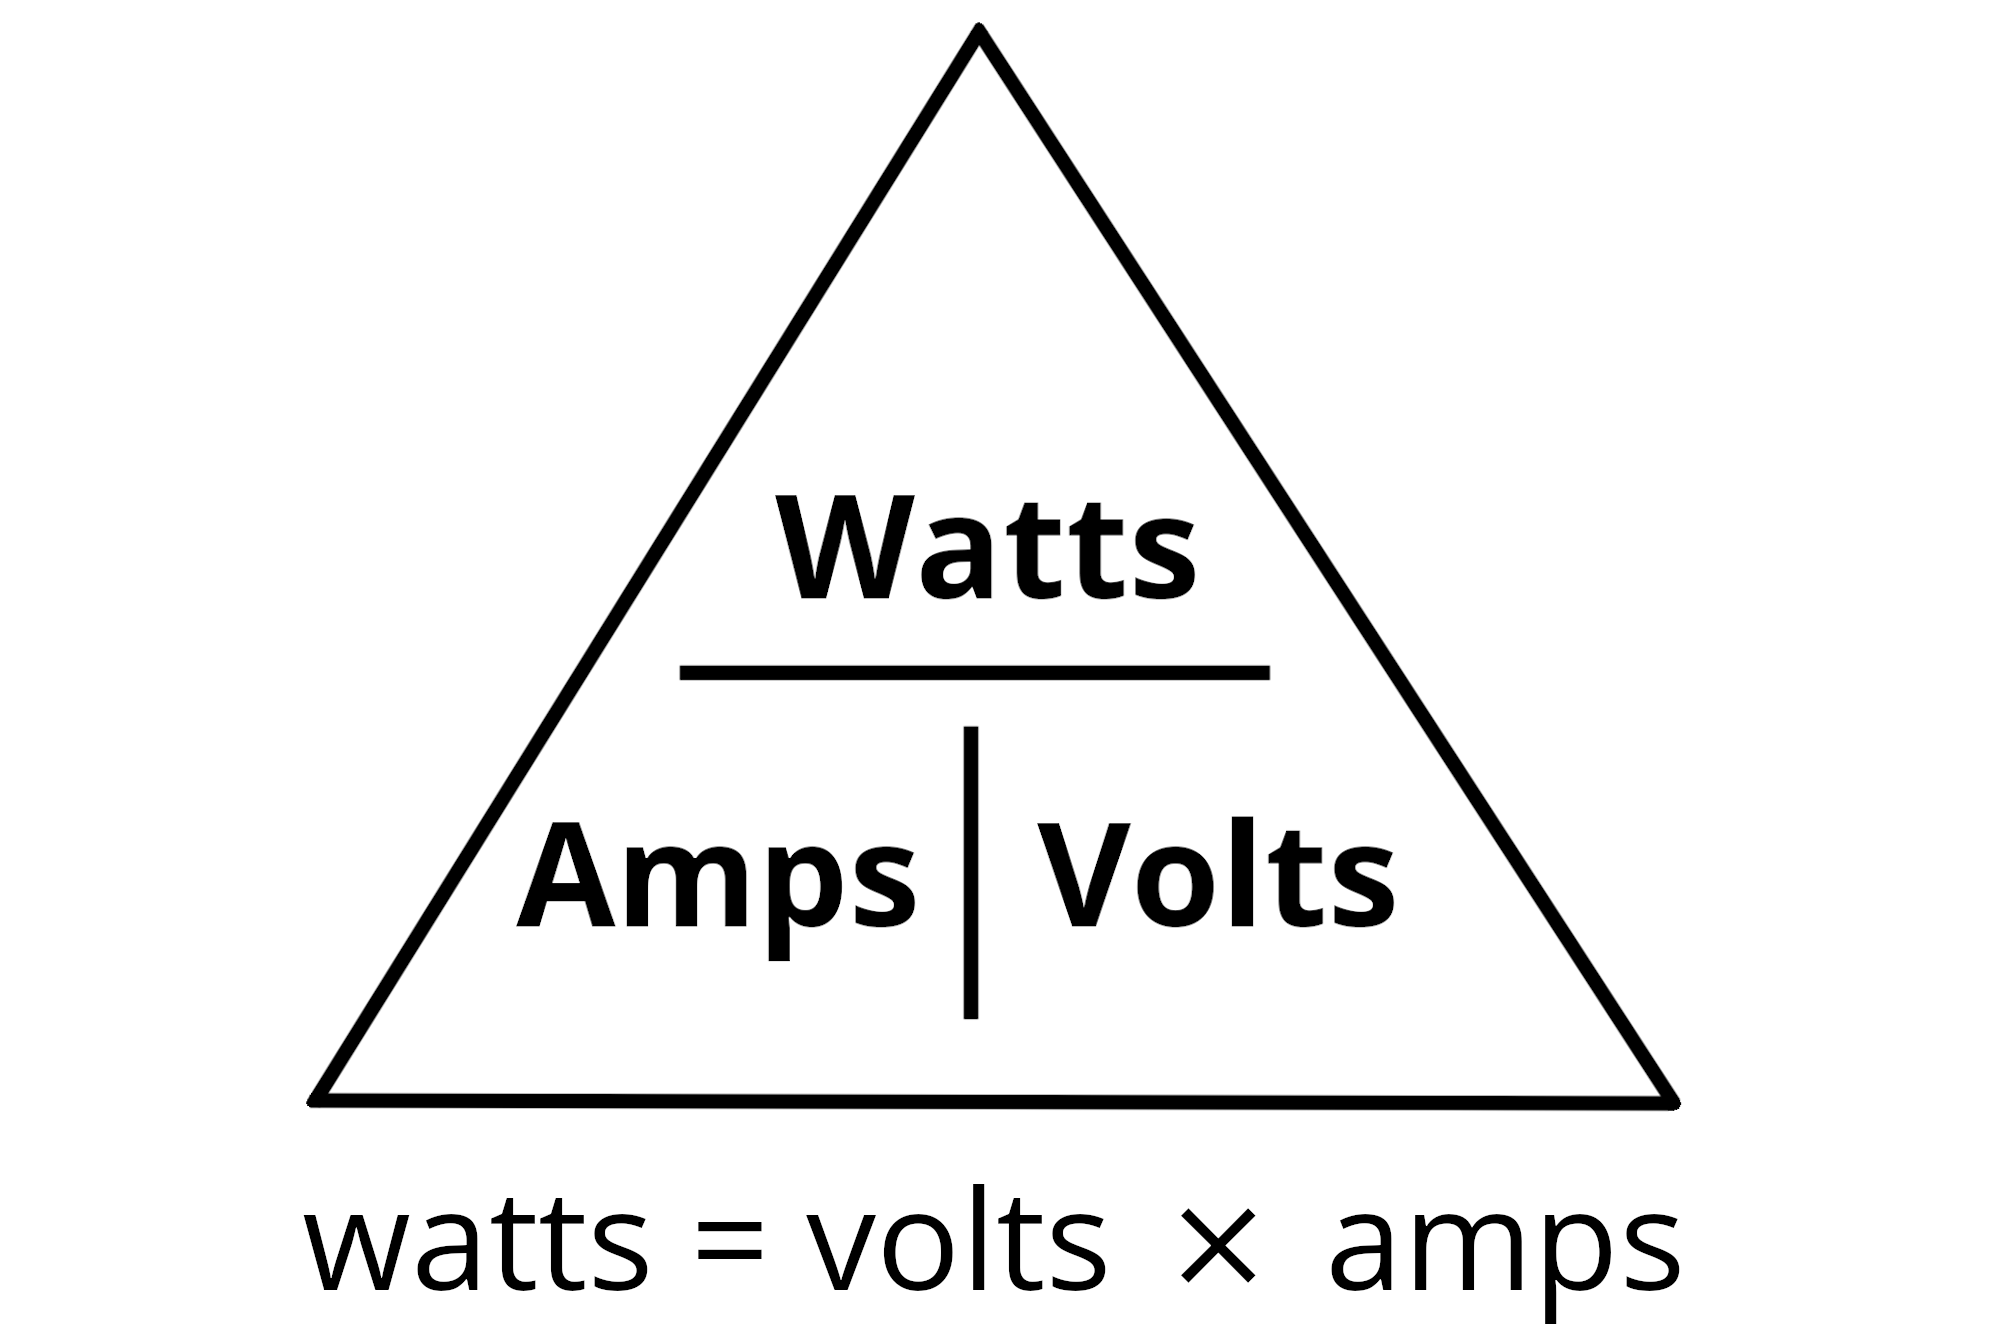 Power triangle illustrating the formula to convert volts to watts with watts being equal to volts times amps